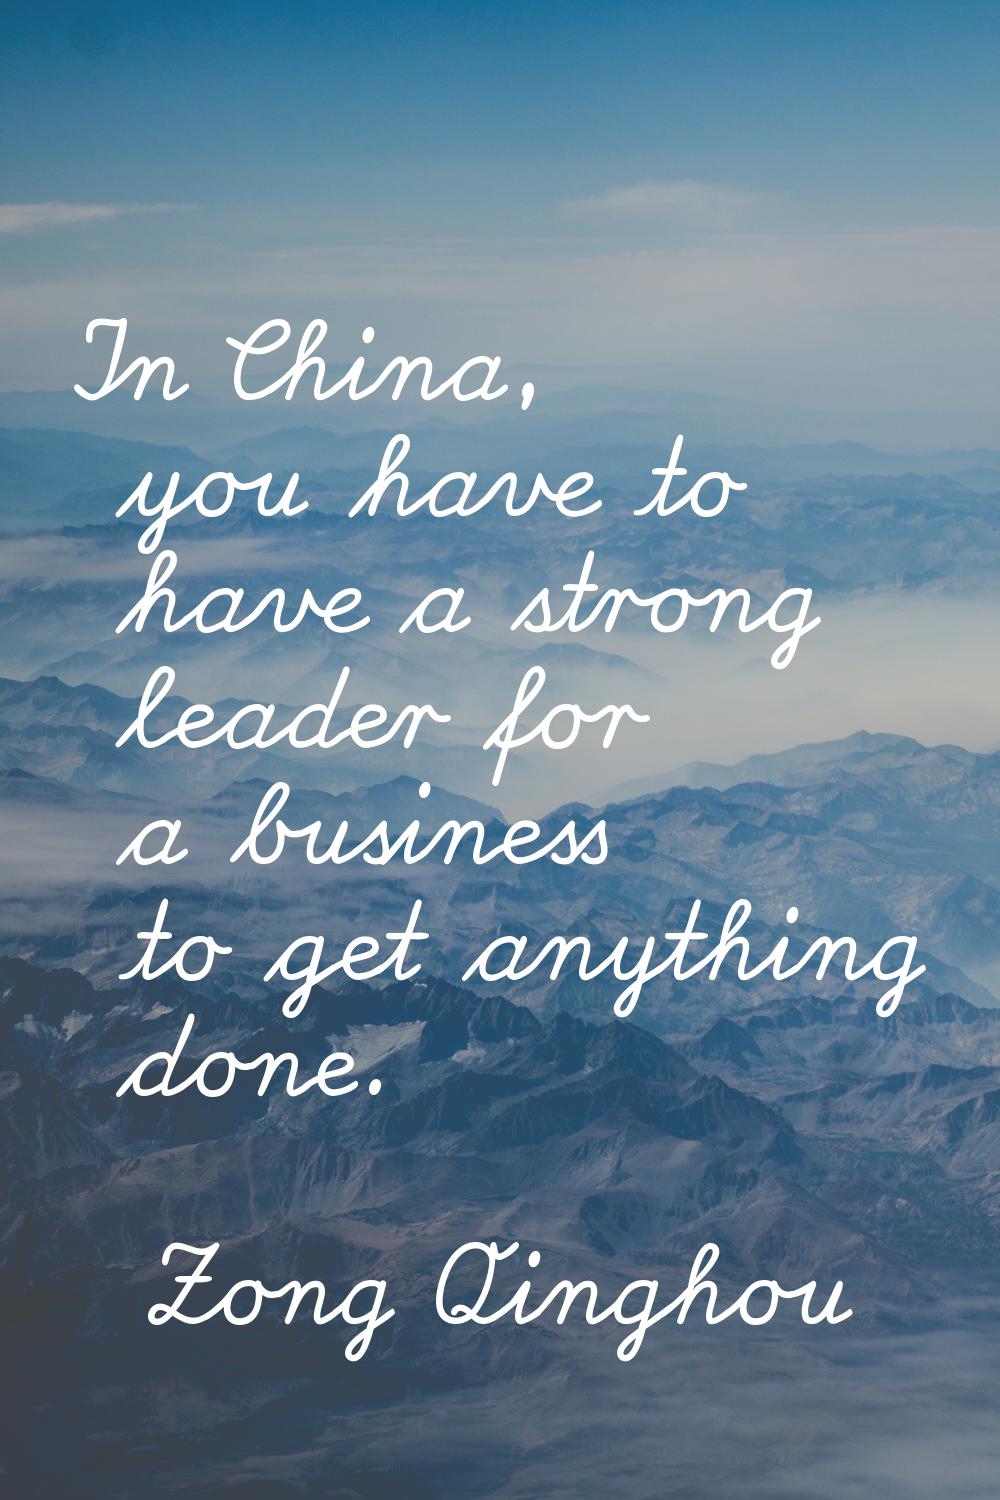 In China, you have to have a strong leader for a business to get anything done.